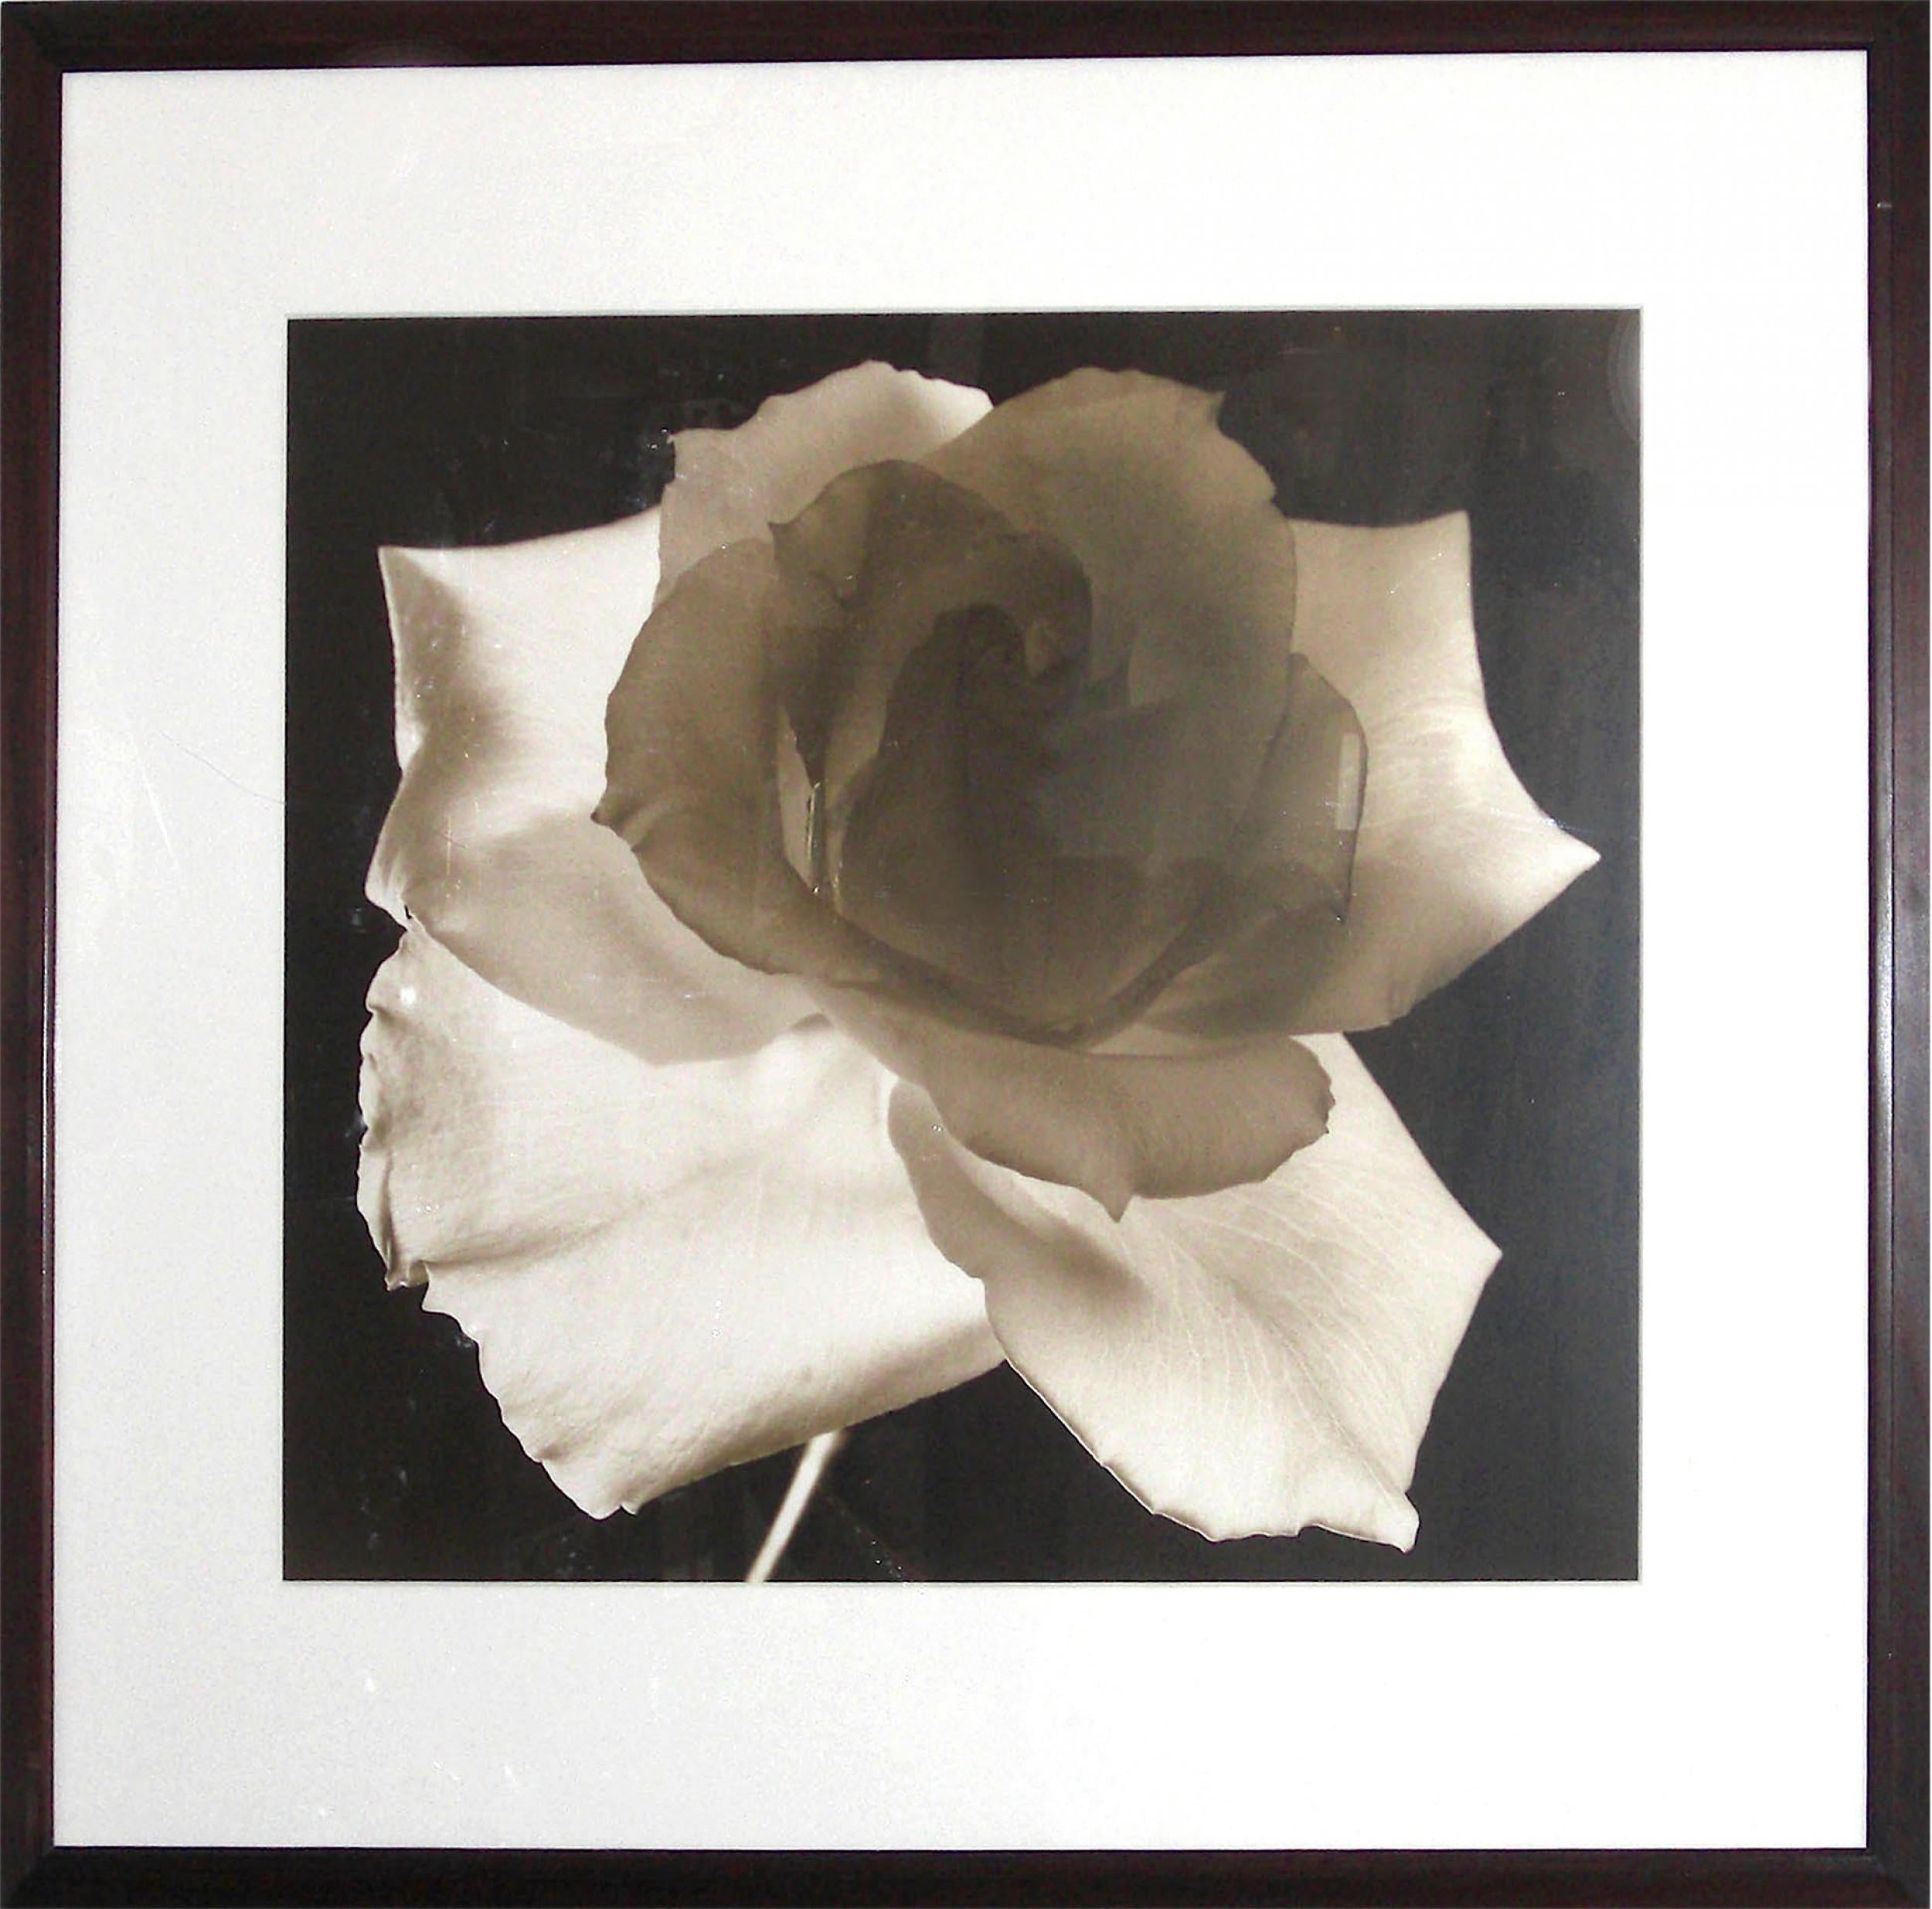 Framed sepia toned silver gelatin enlargement depicting a rose in bloom. The photograph was taken by American artist Frederic Ohringer (b. 1940) entitled 